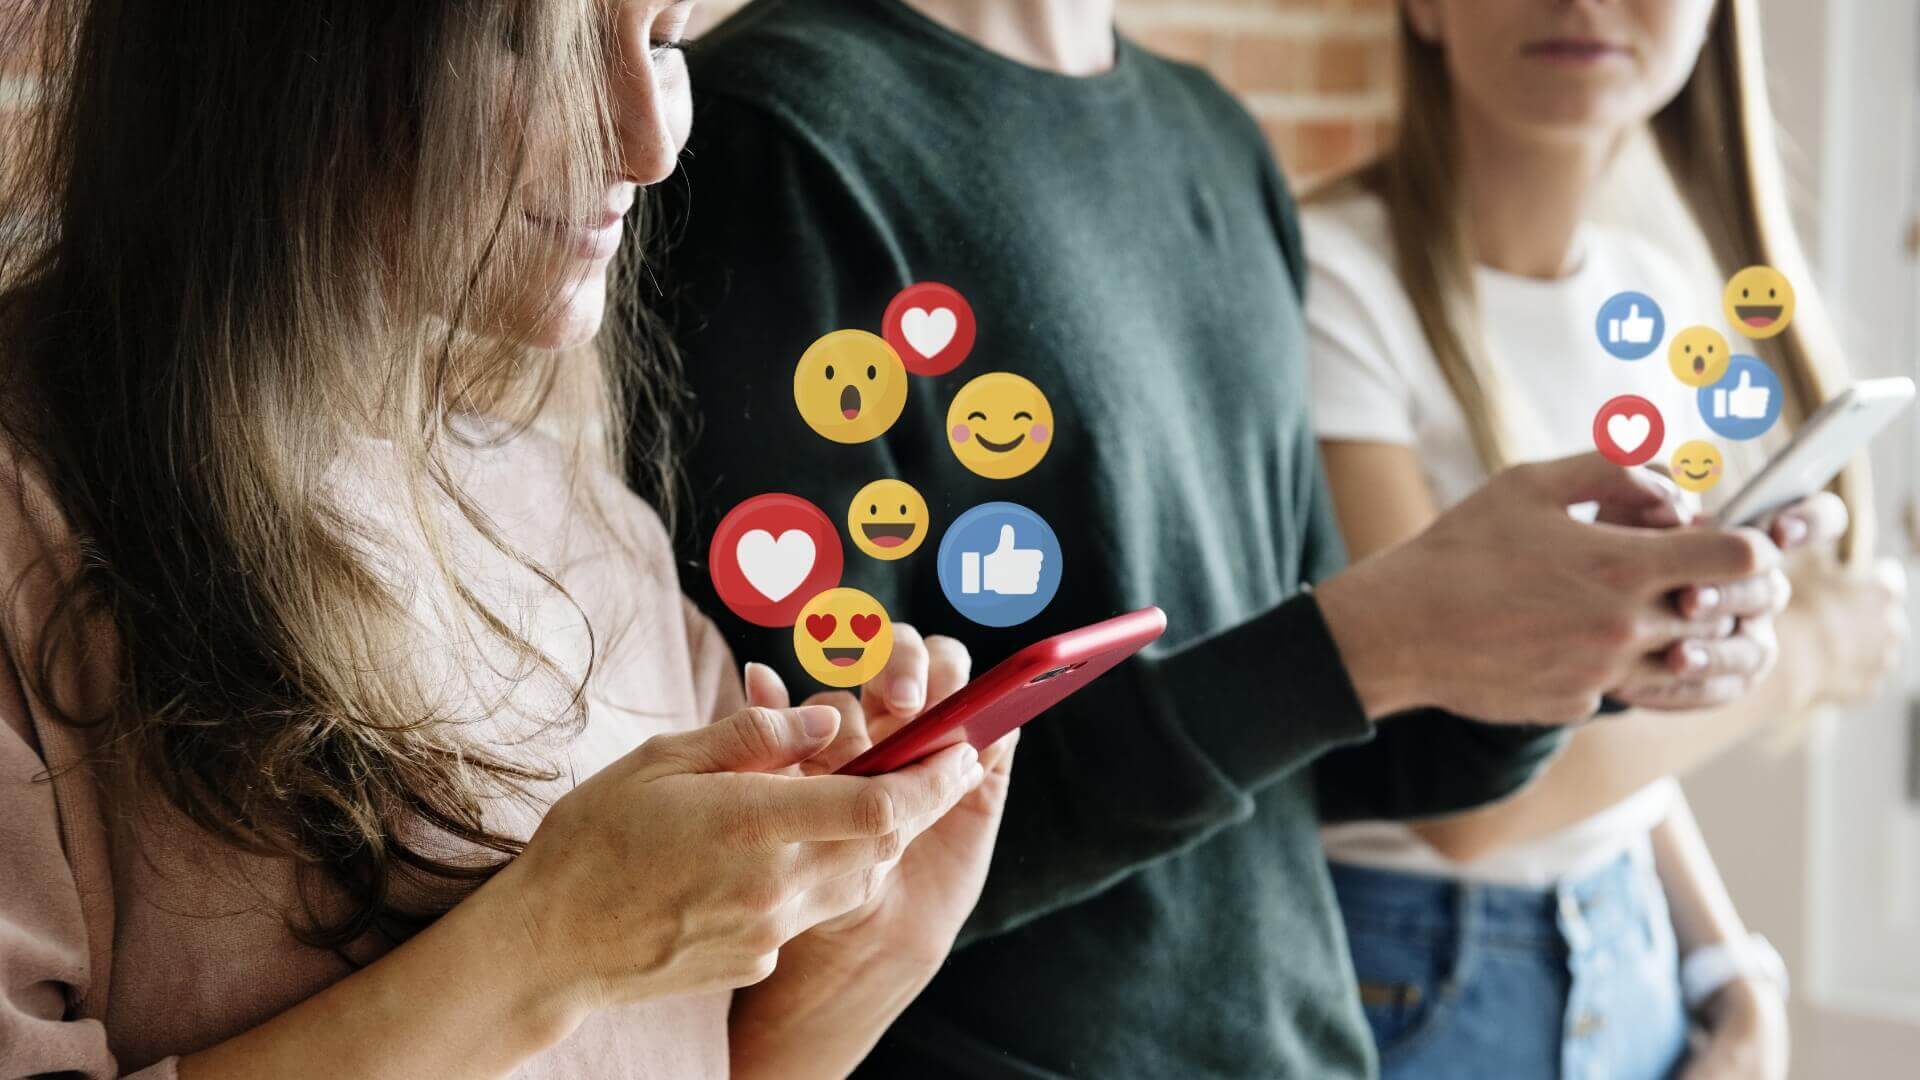 What is the Most Used Social Media App